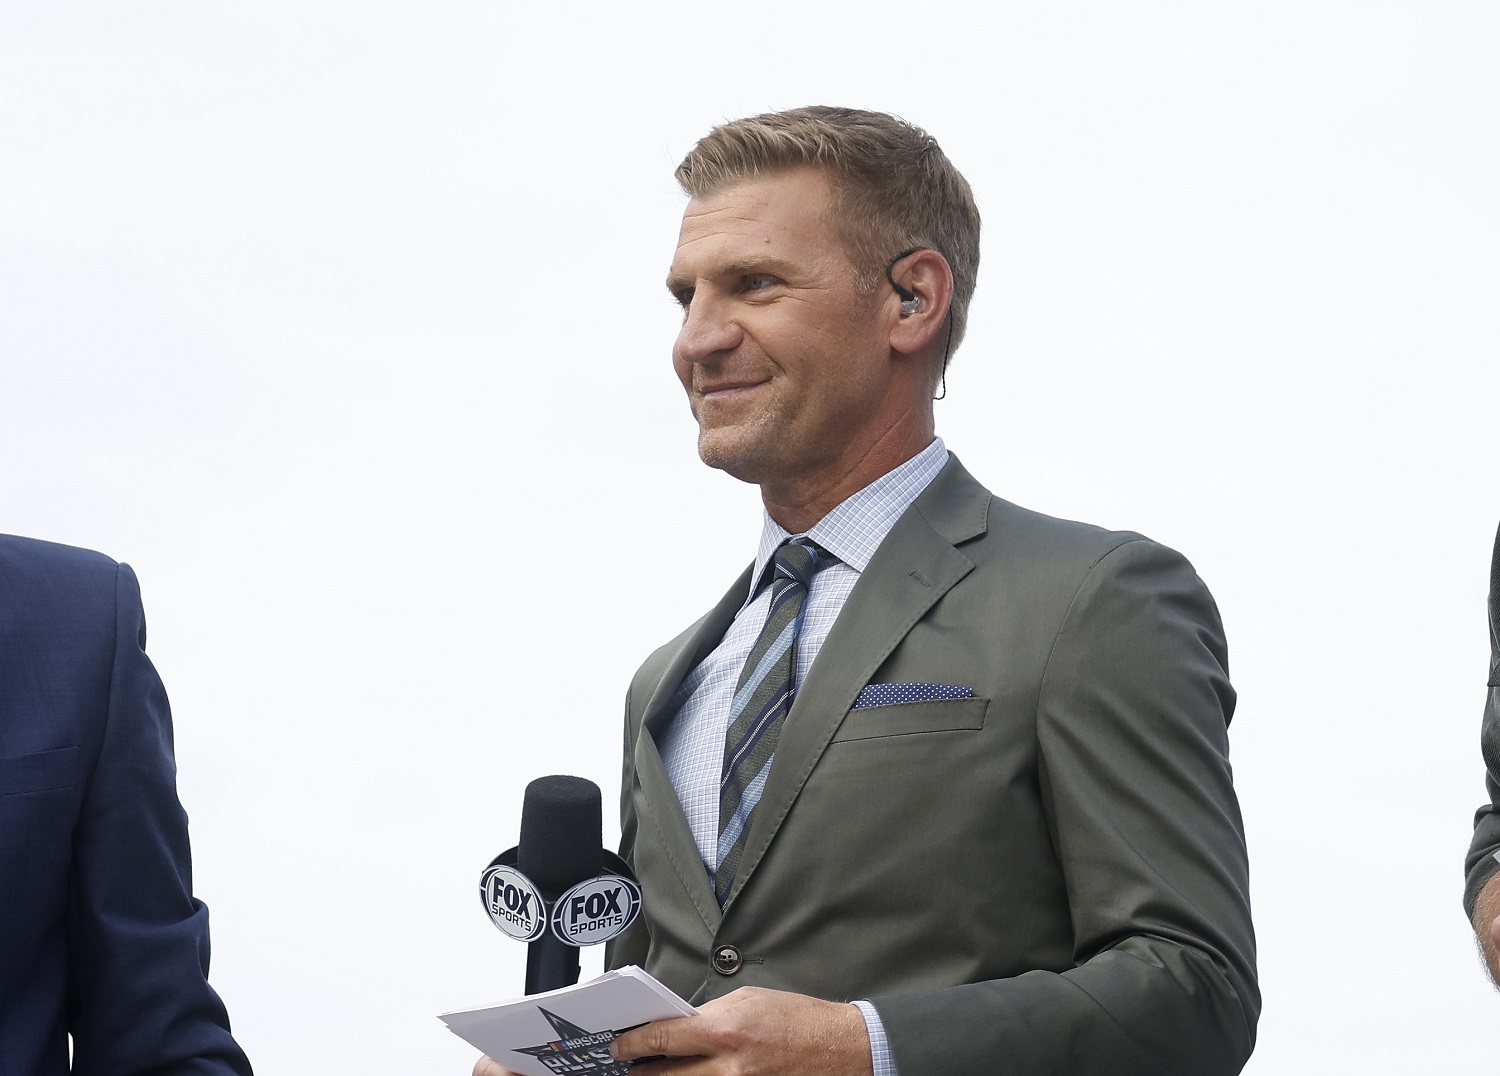 NASCAR Fox Sports analyst Clint Bowyer during ceremonies prior to the NASCAR Cup Series All-Star Race at Texas Motor Speedway on May 22, 2022. | Chris Graythen/Getty Images